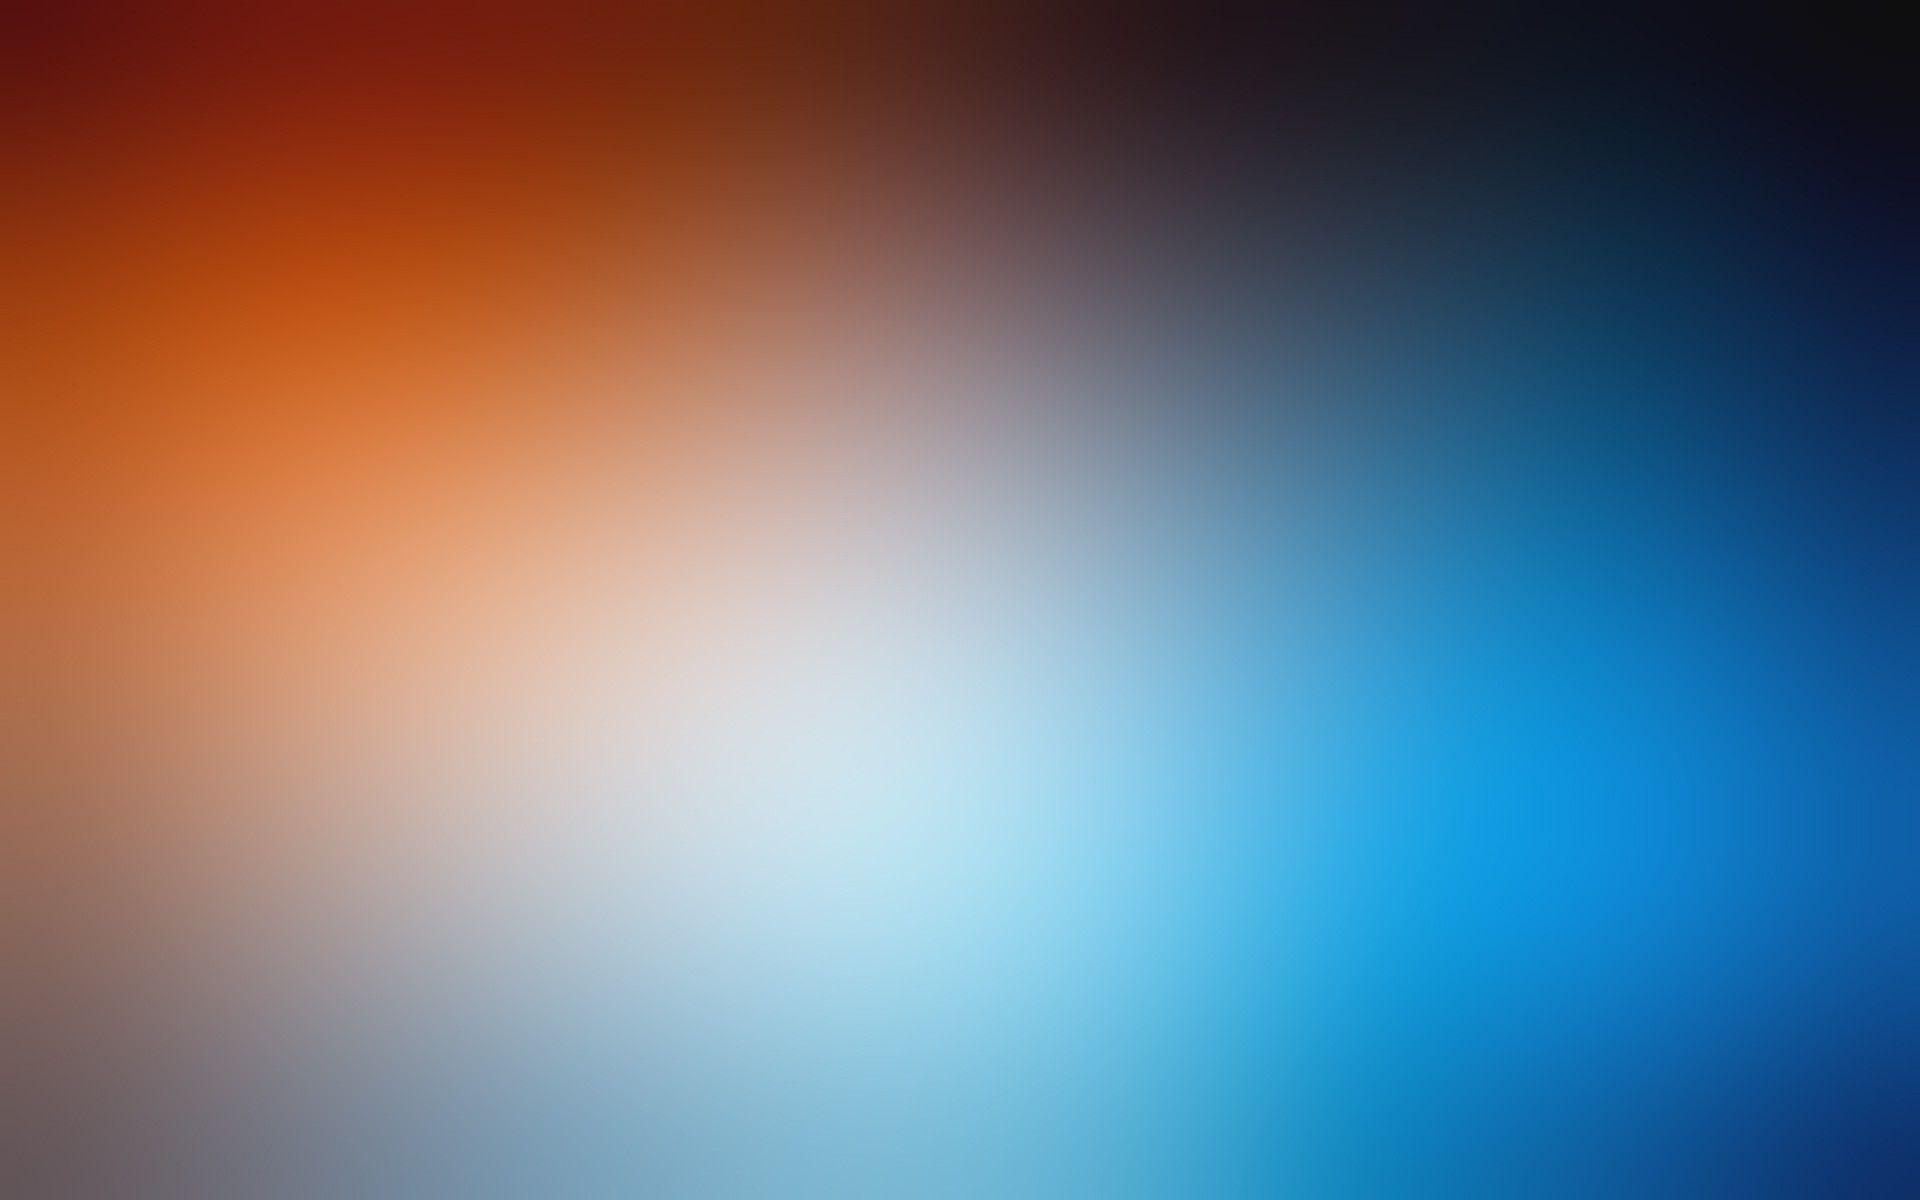 Wallpaper, 1920x1200 px, 3D, colorful, simple background 1920x1200